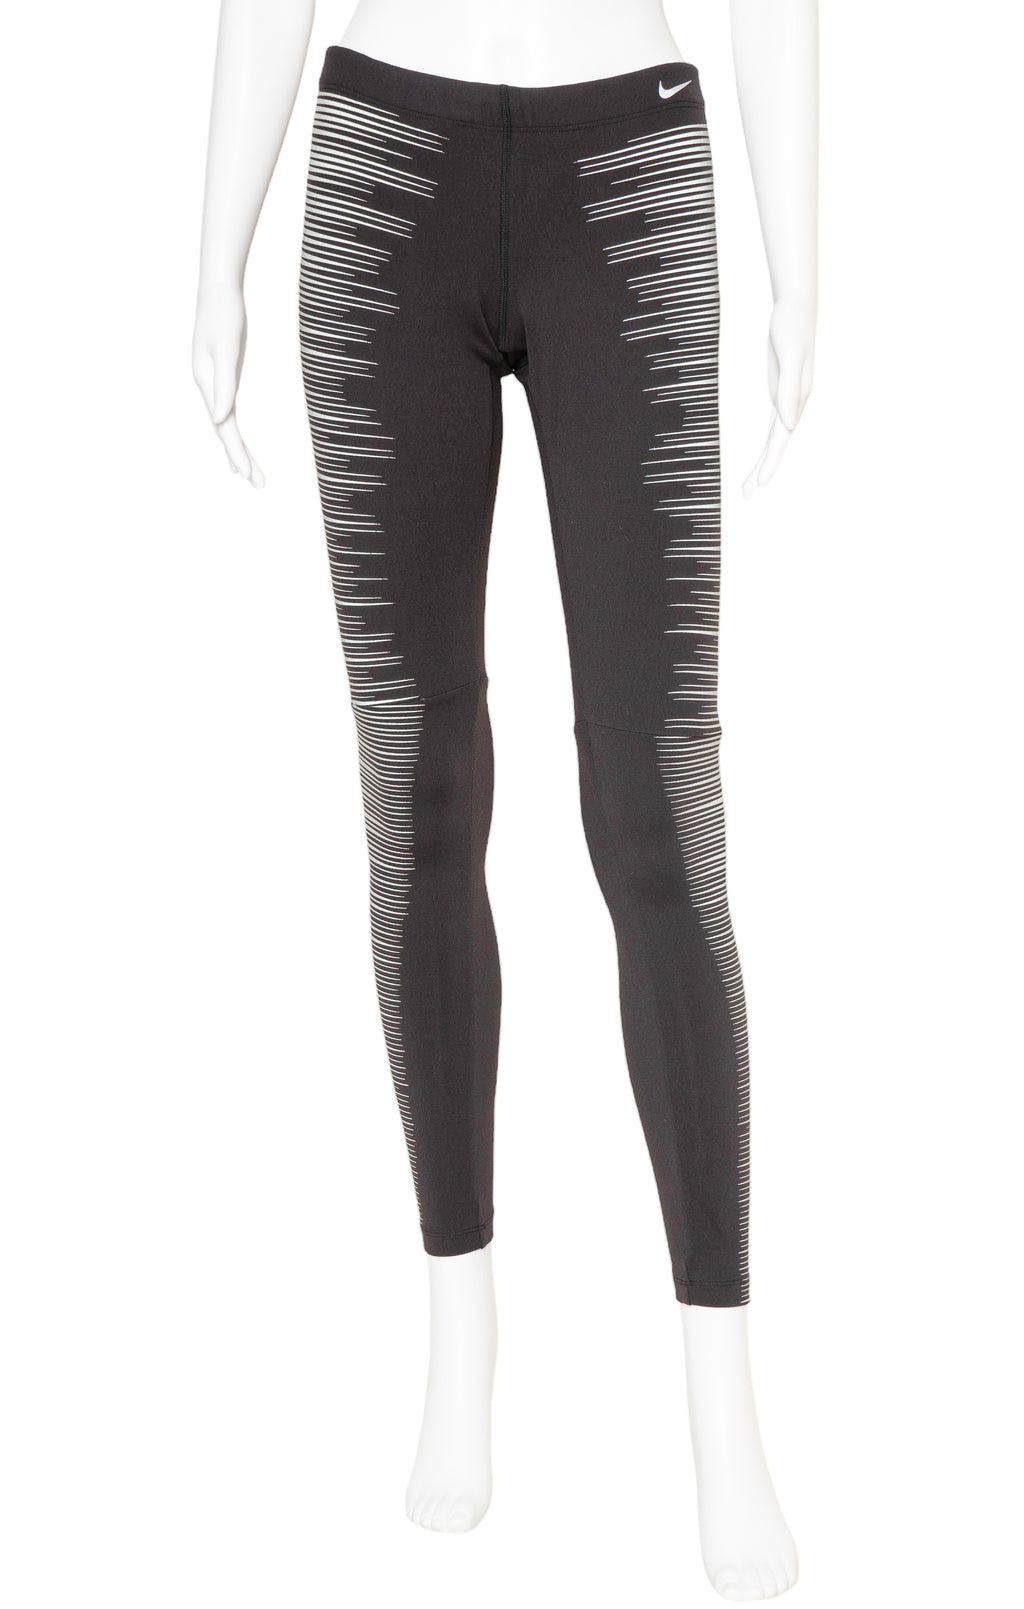 NIKE (NEW) with tags Leggings Size: S